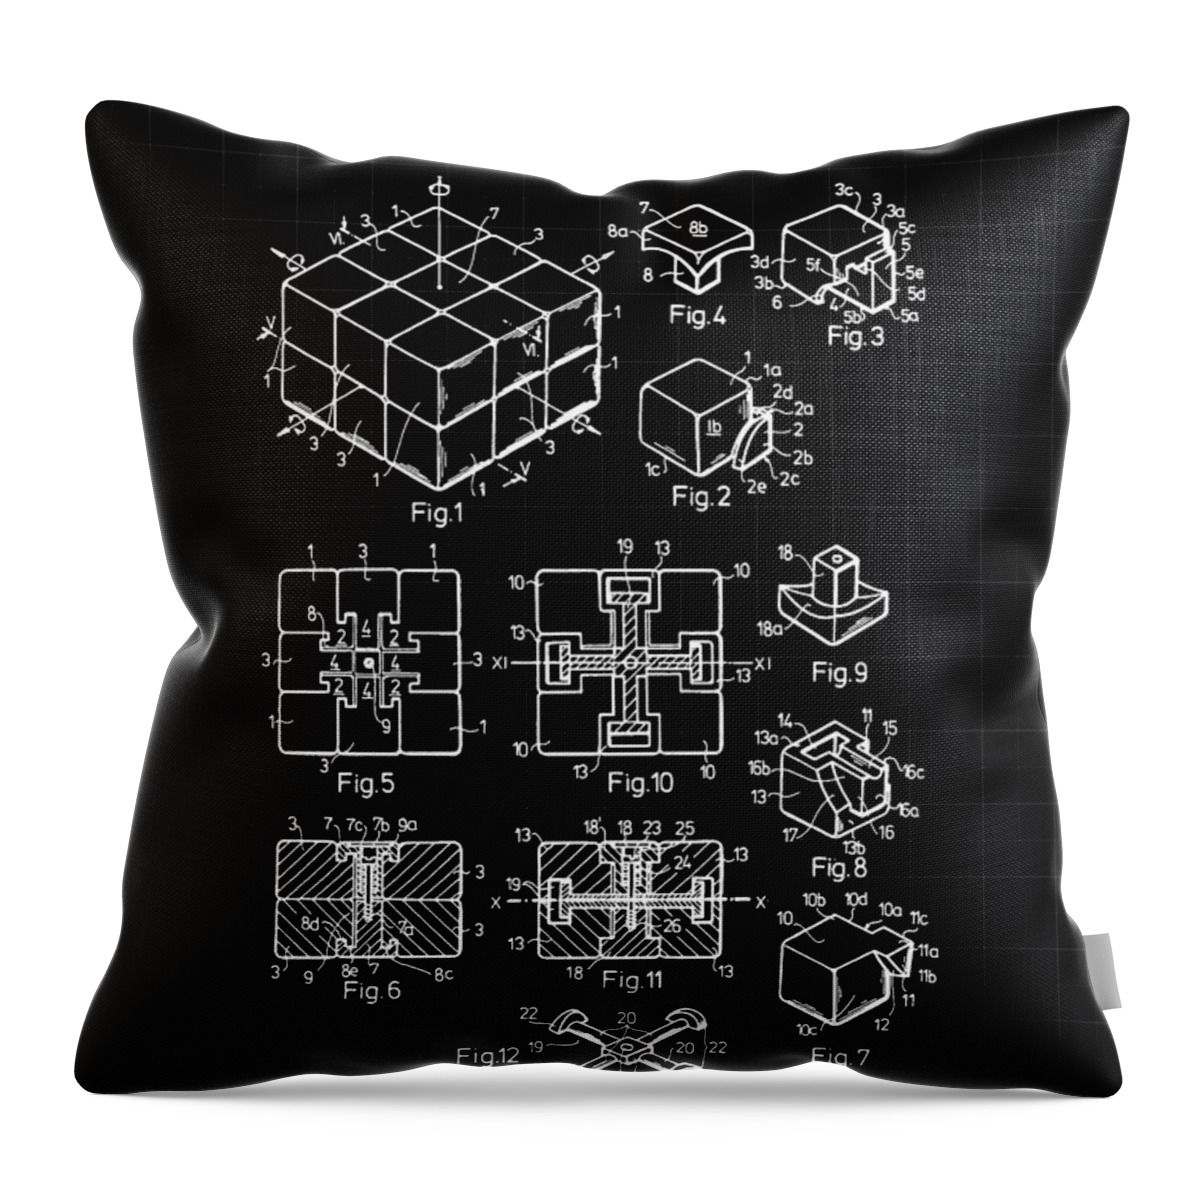 Rubik's Cube Throw Pillow featuring the digital art Rubik's Cube Patent 1983 - Black and White by Marianna Mills